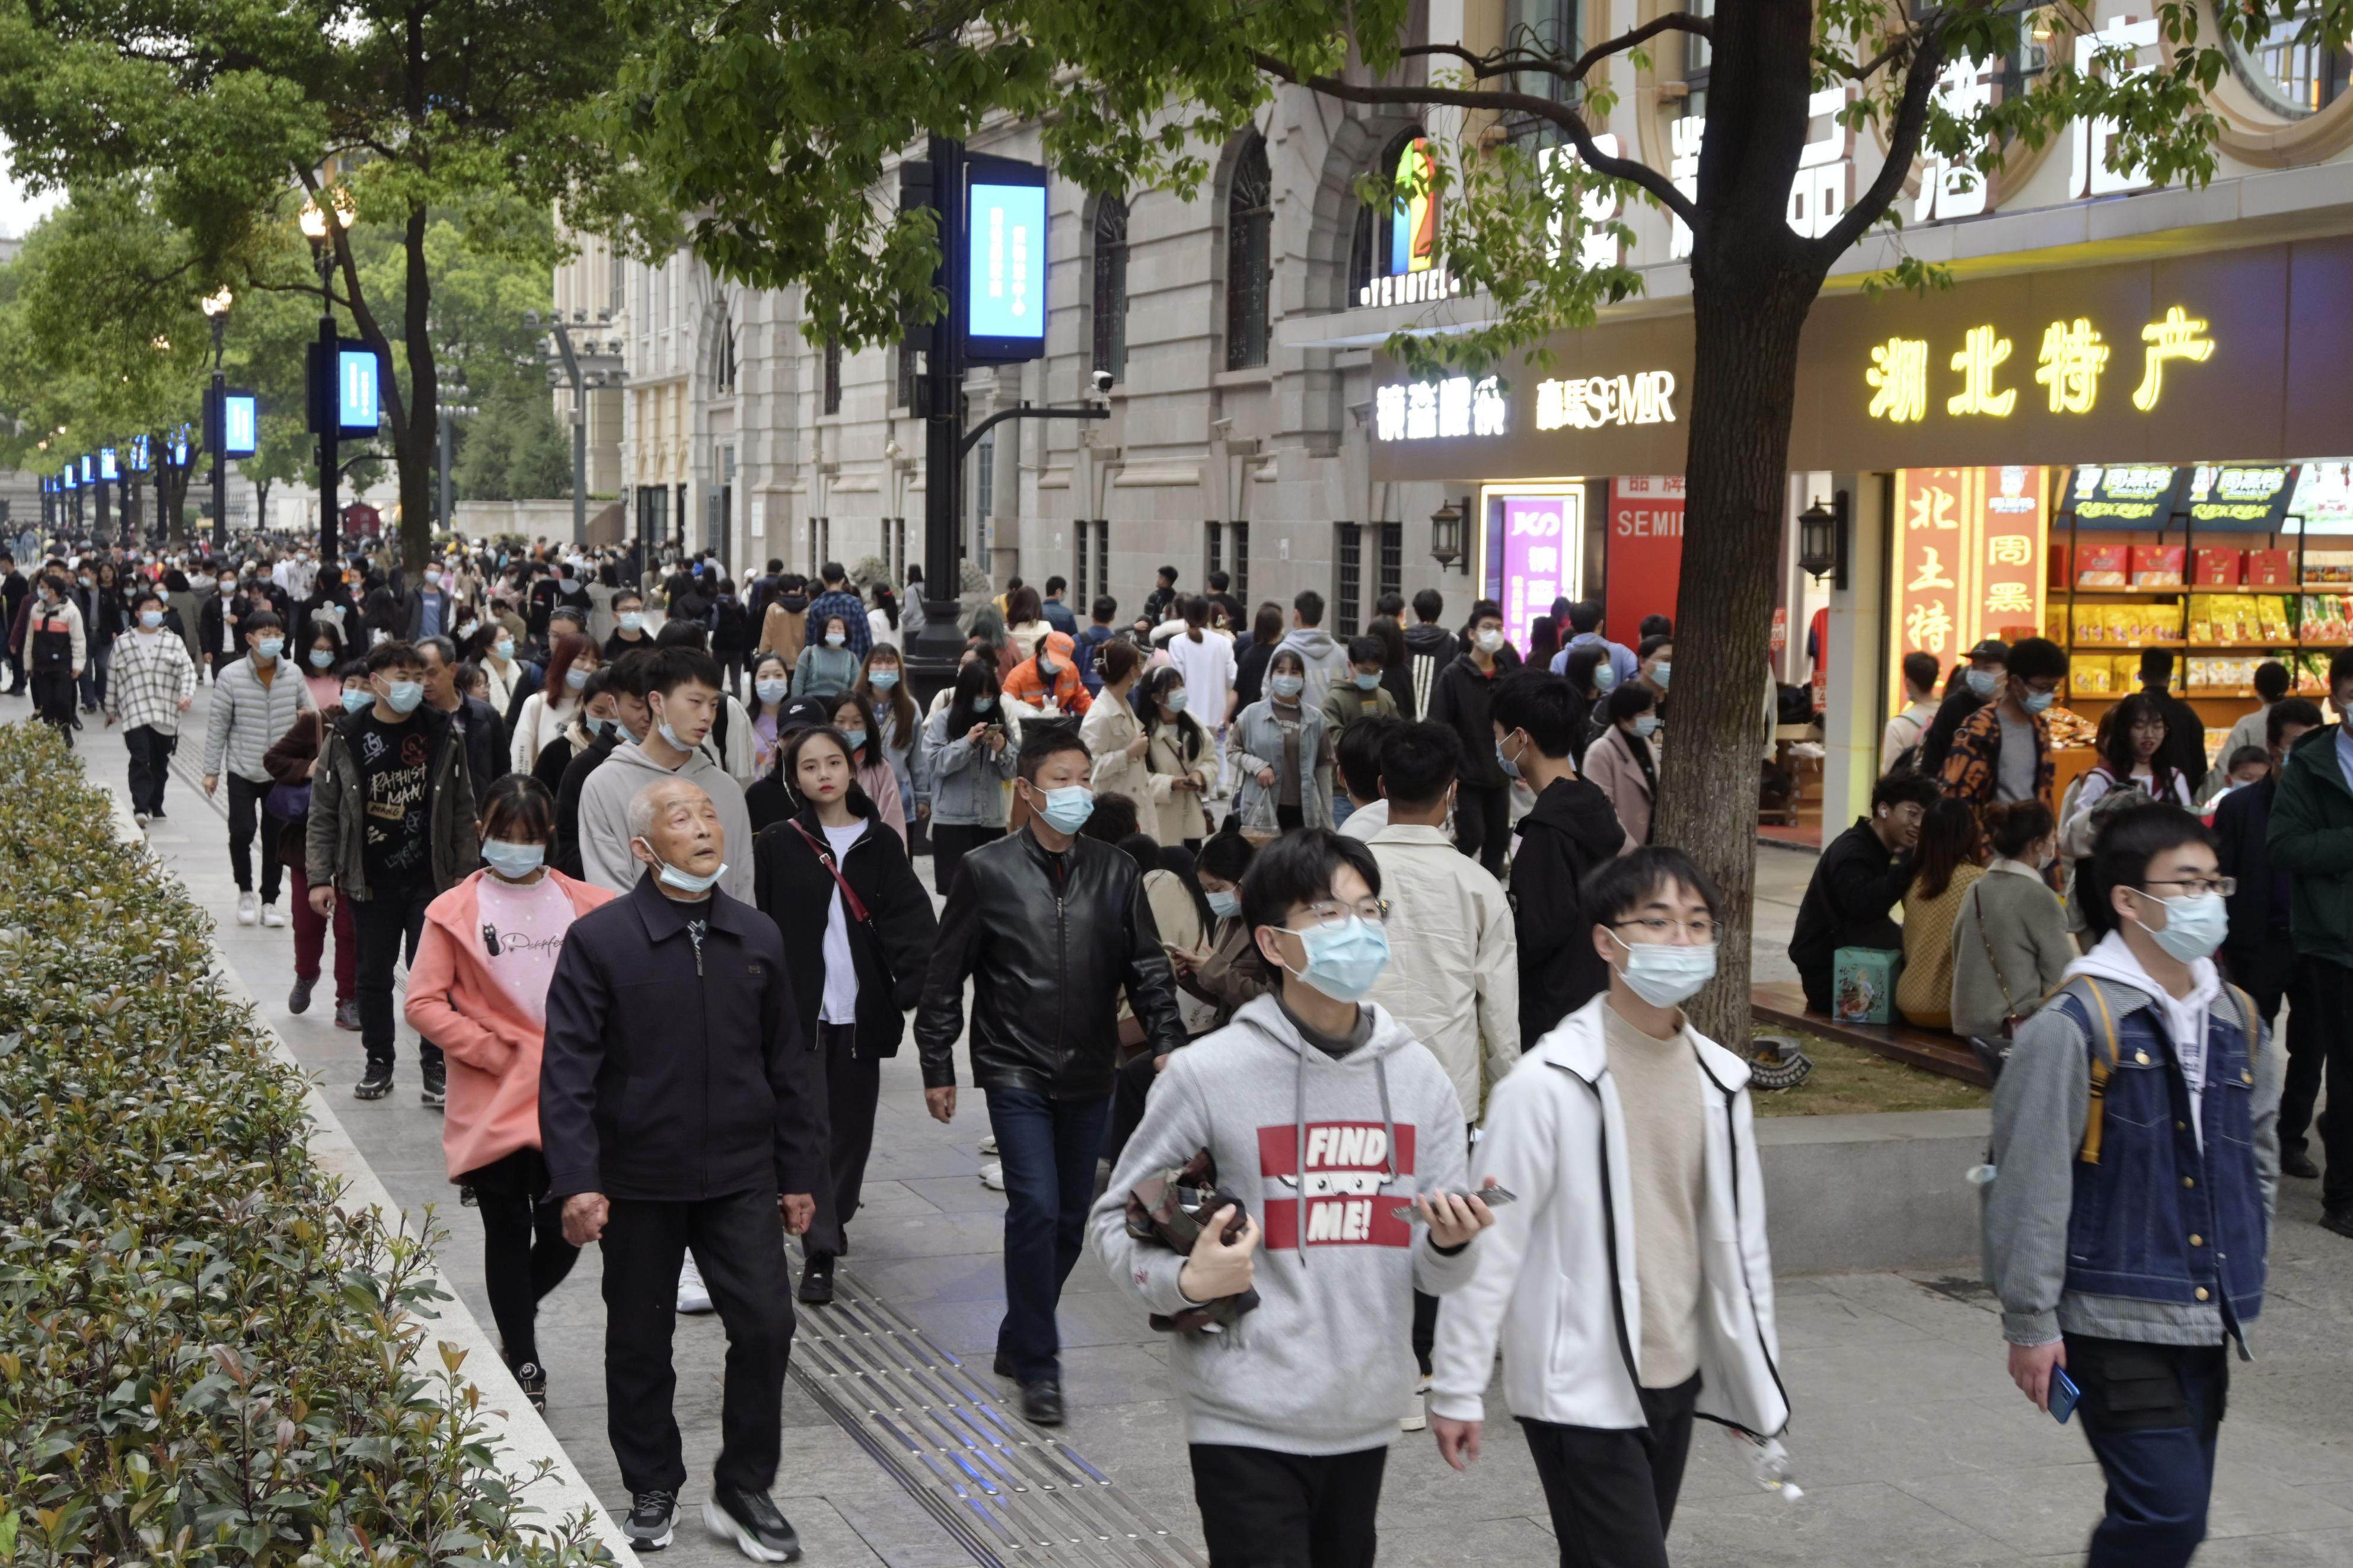 A crowded shopping street in Wuhan on April 4, 2021, about a year after the world’s first coronavirus lockdown was lifted in the city. China is now expected to overtake the US as the top economy by 2028, thanks in part to its handling of the pandemic. Photo: Kyodo